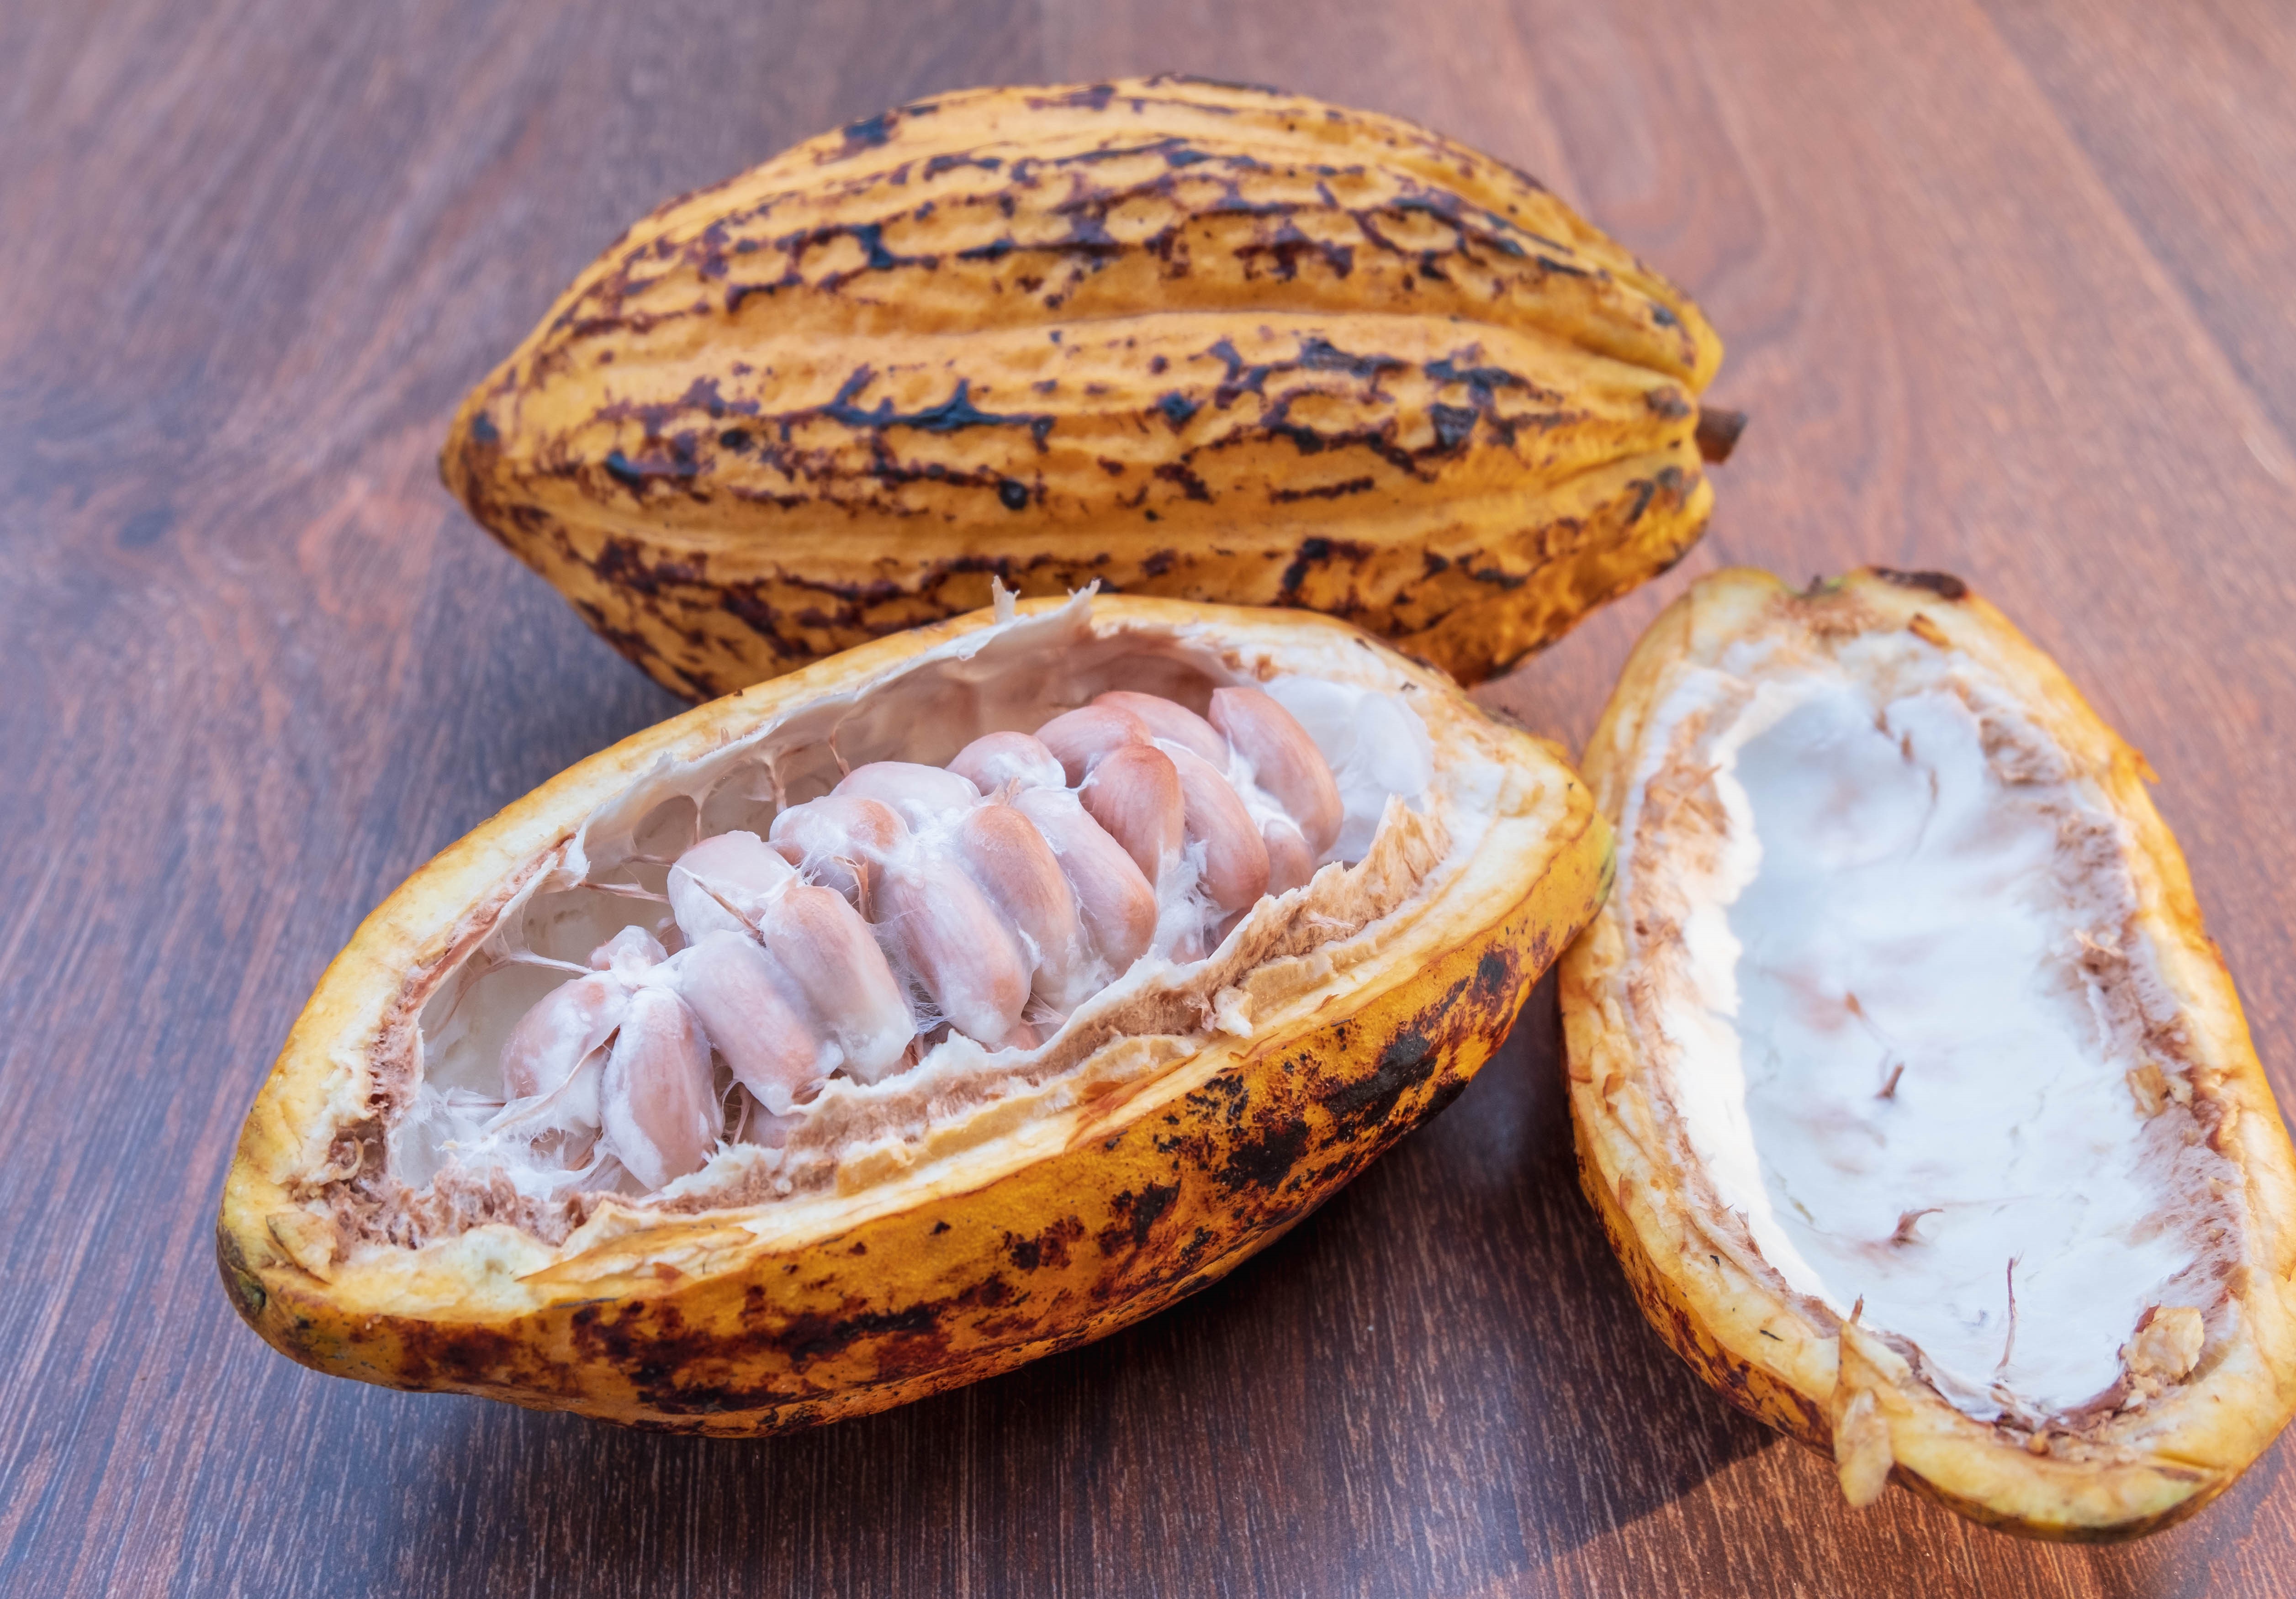 fresh-cocoa-fruits-with-half-sliced-on-wooden-table.jpg